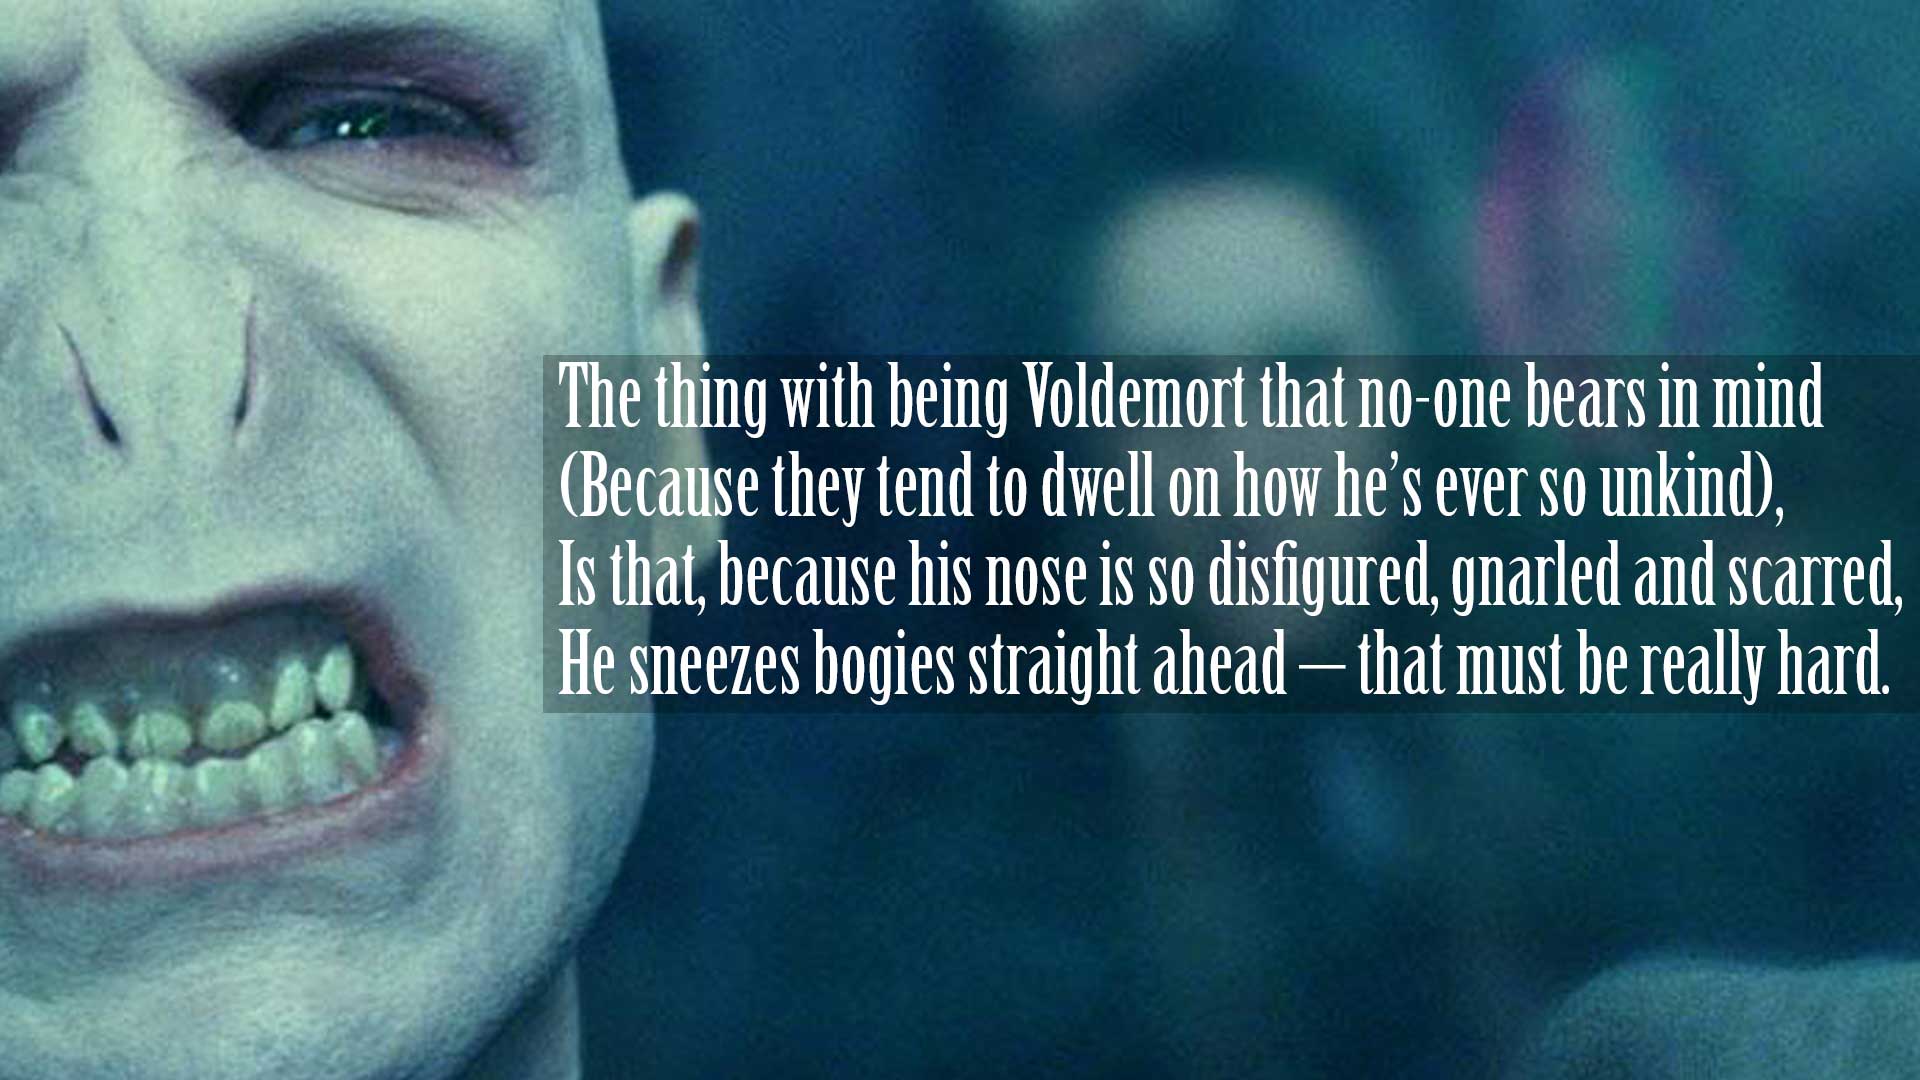 The thing with being Voldemort that no-one bears in mind (Because they tend to dwell on how he’s ever so unkind), Is that, because his nose is so disfigured, gnarled and scarred, He sneezes bogies straight ahead – that must be really hard.